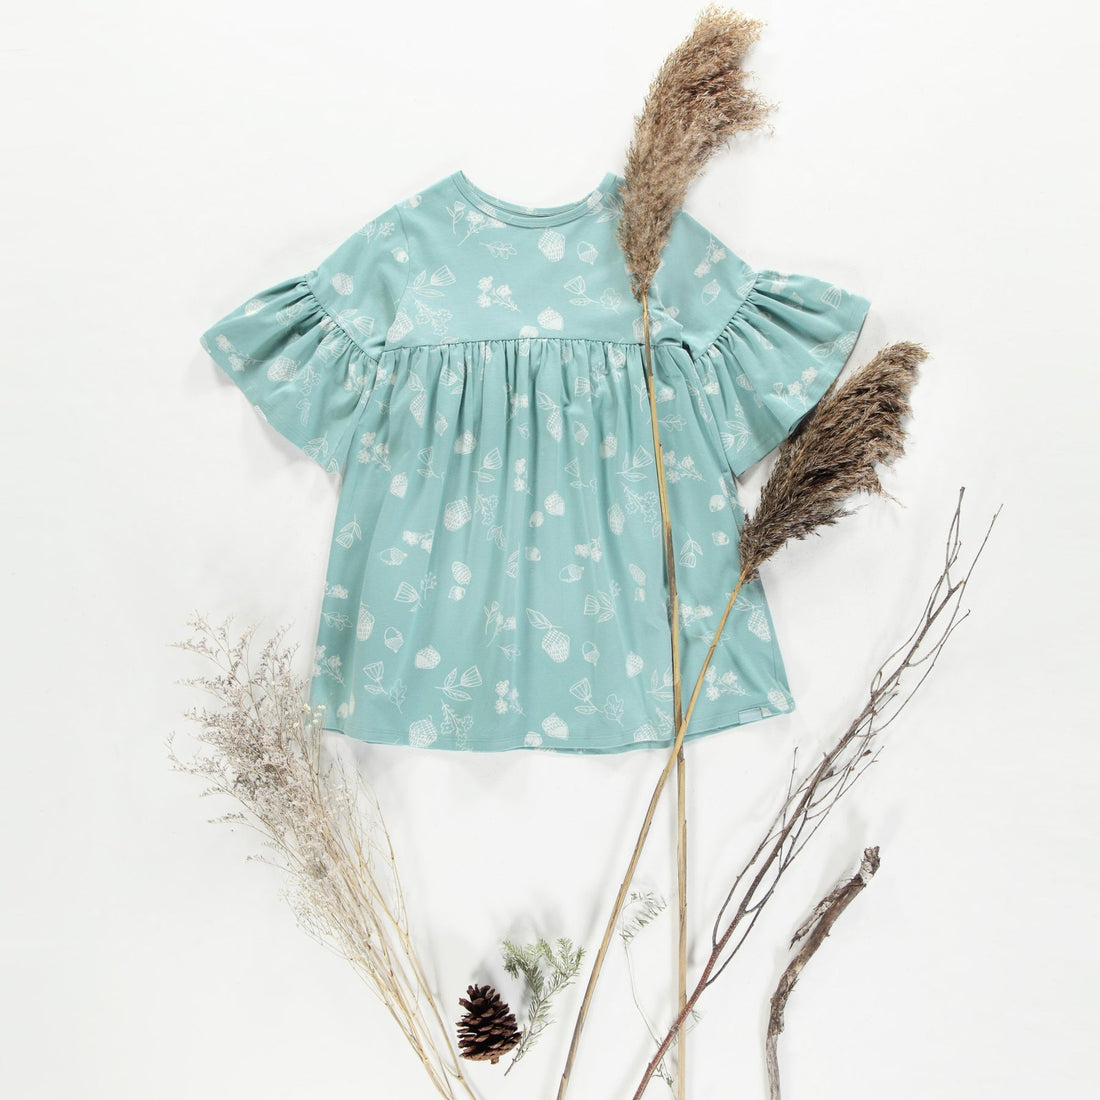 LIGHT TURQUOISE DRESS WITH HAZELNUTS PATTERN IN SOFT JERSEY, CHILD